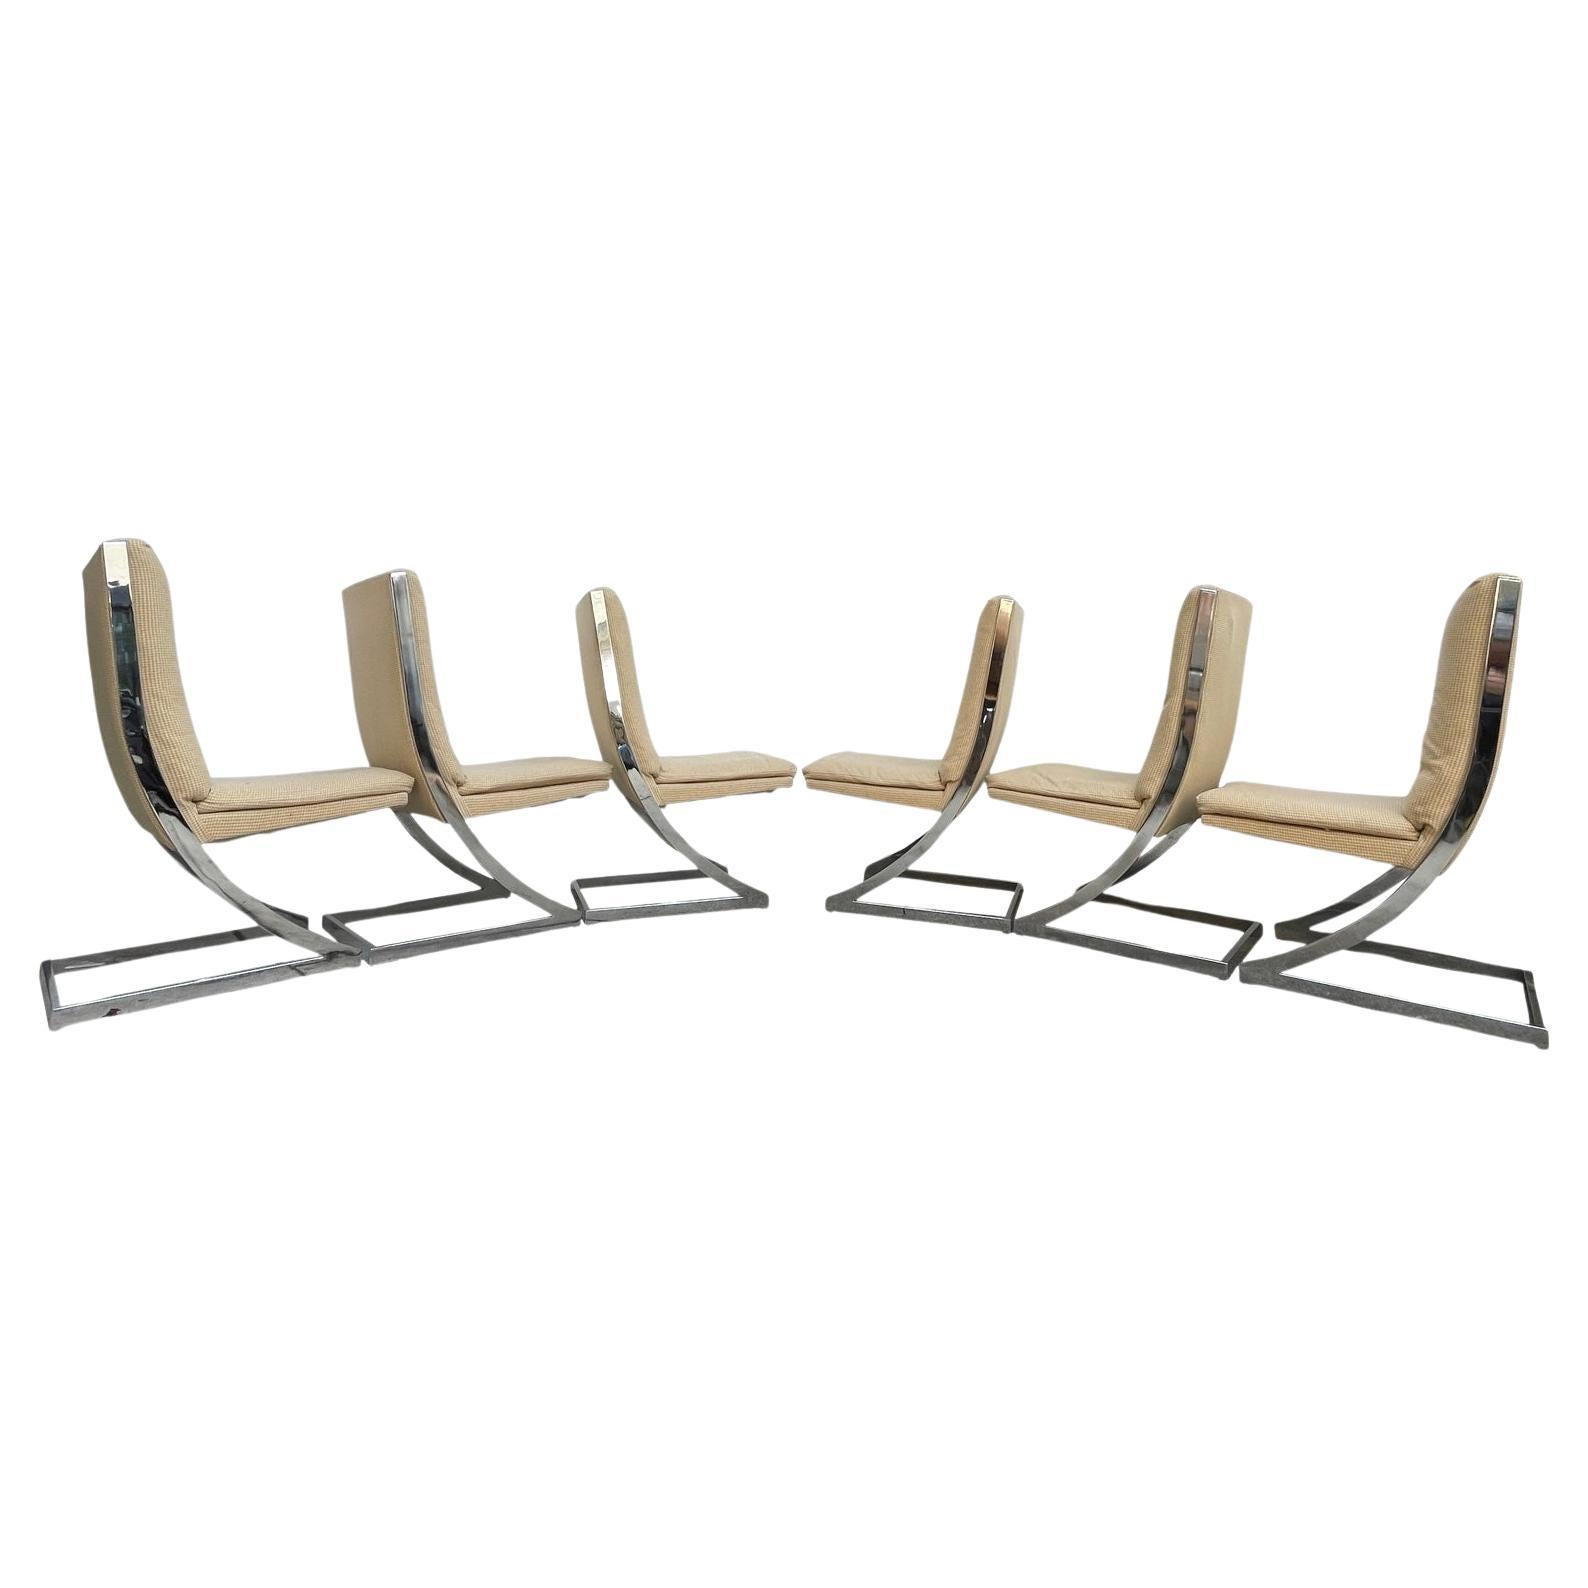 1980s DIA Vintage Milo Baughman Cantilever Z Dining Chairs Set Of 6 For Sale